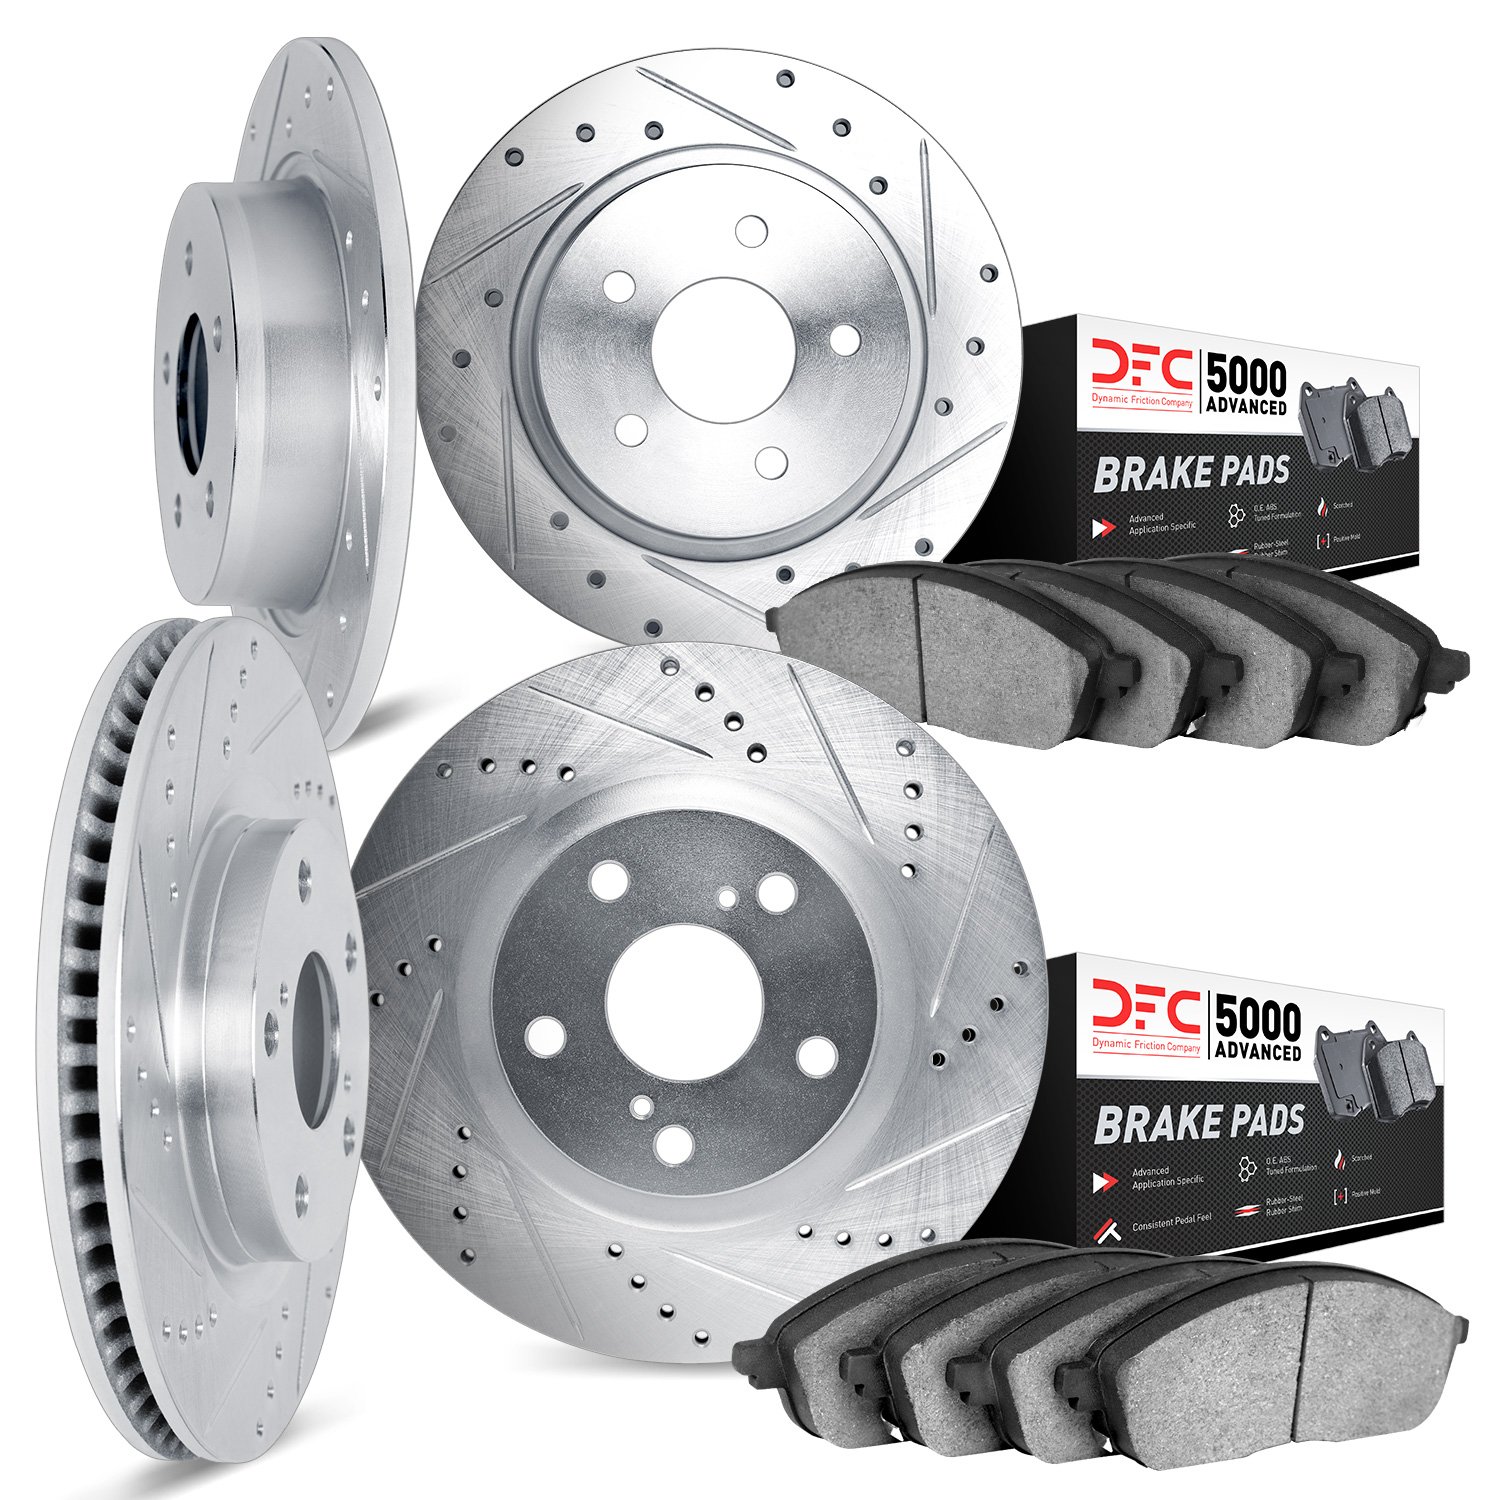 7504-39038 Drilled/Slotted Brake Rotors w/5000 Advanced Brake Pads Kit [Silver], Fits Select Mopar, Position: Front and Rear